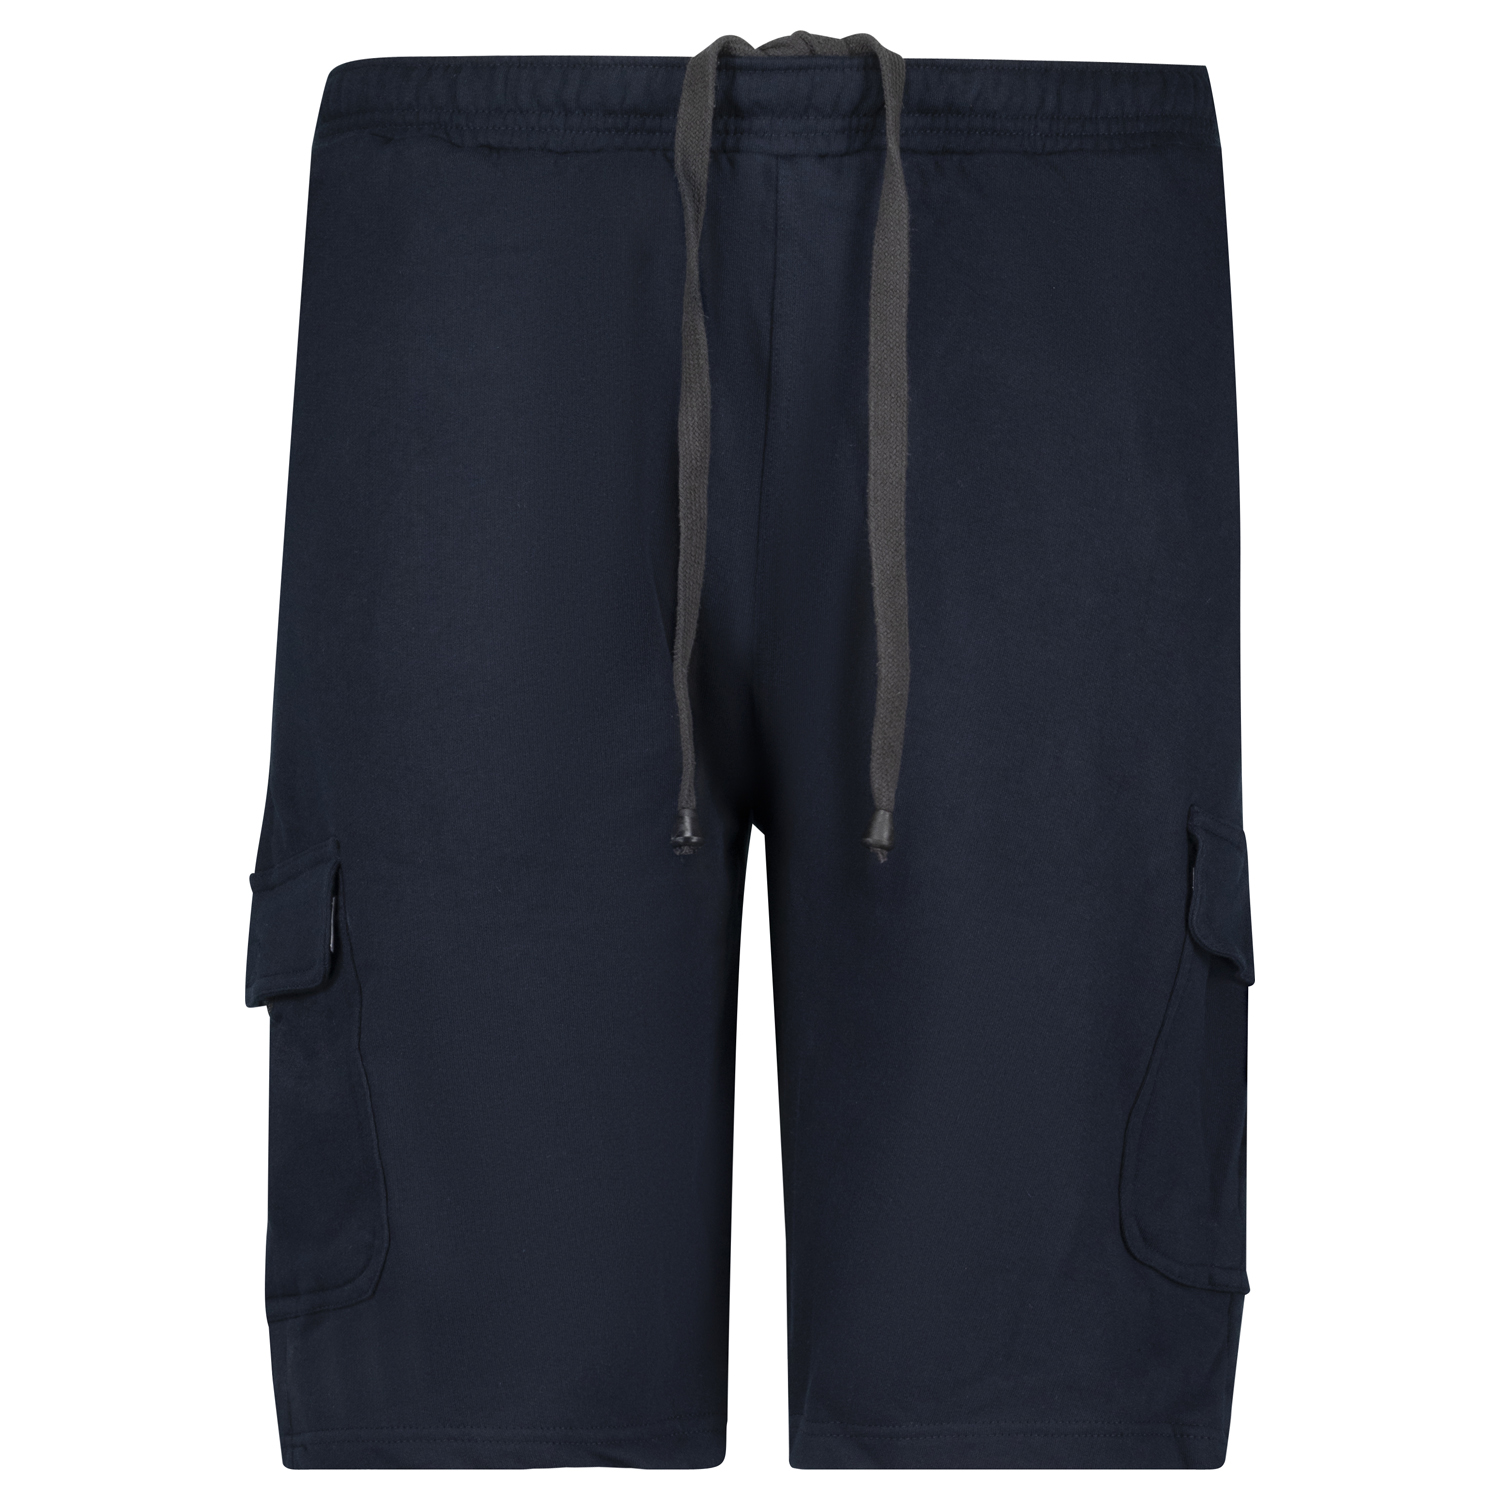 Cargoshorts series ATHEN by Adamo in oversize up to 14XL for men